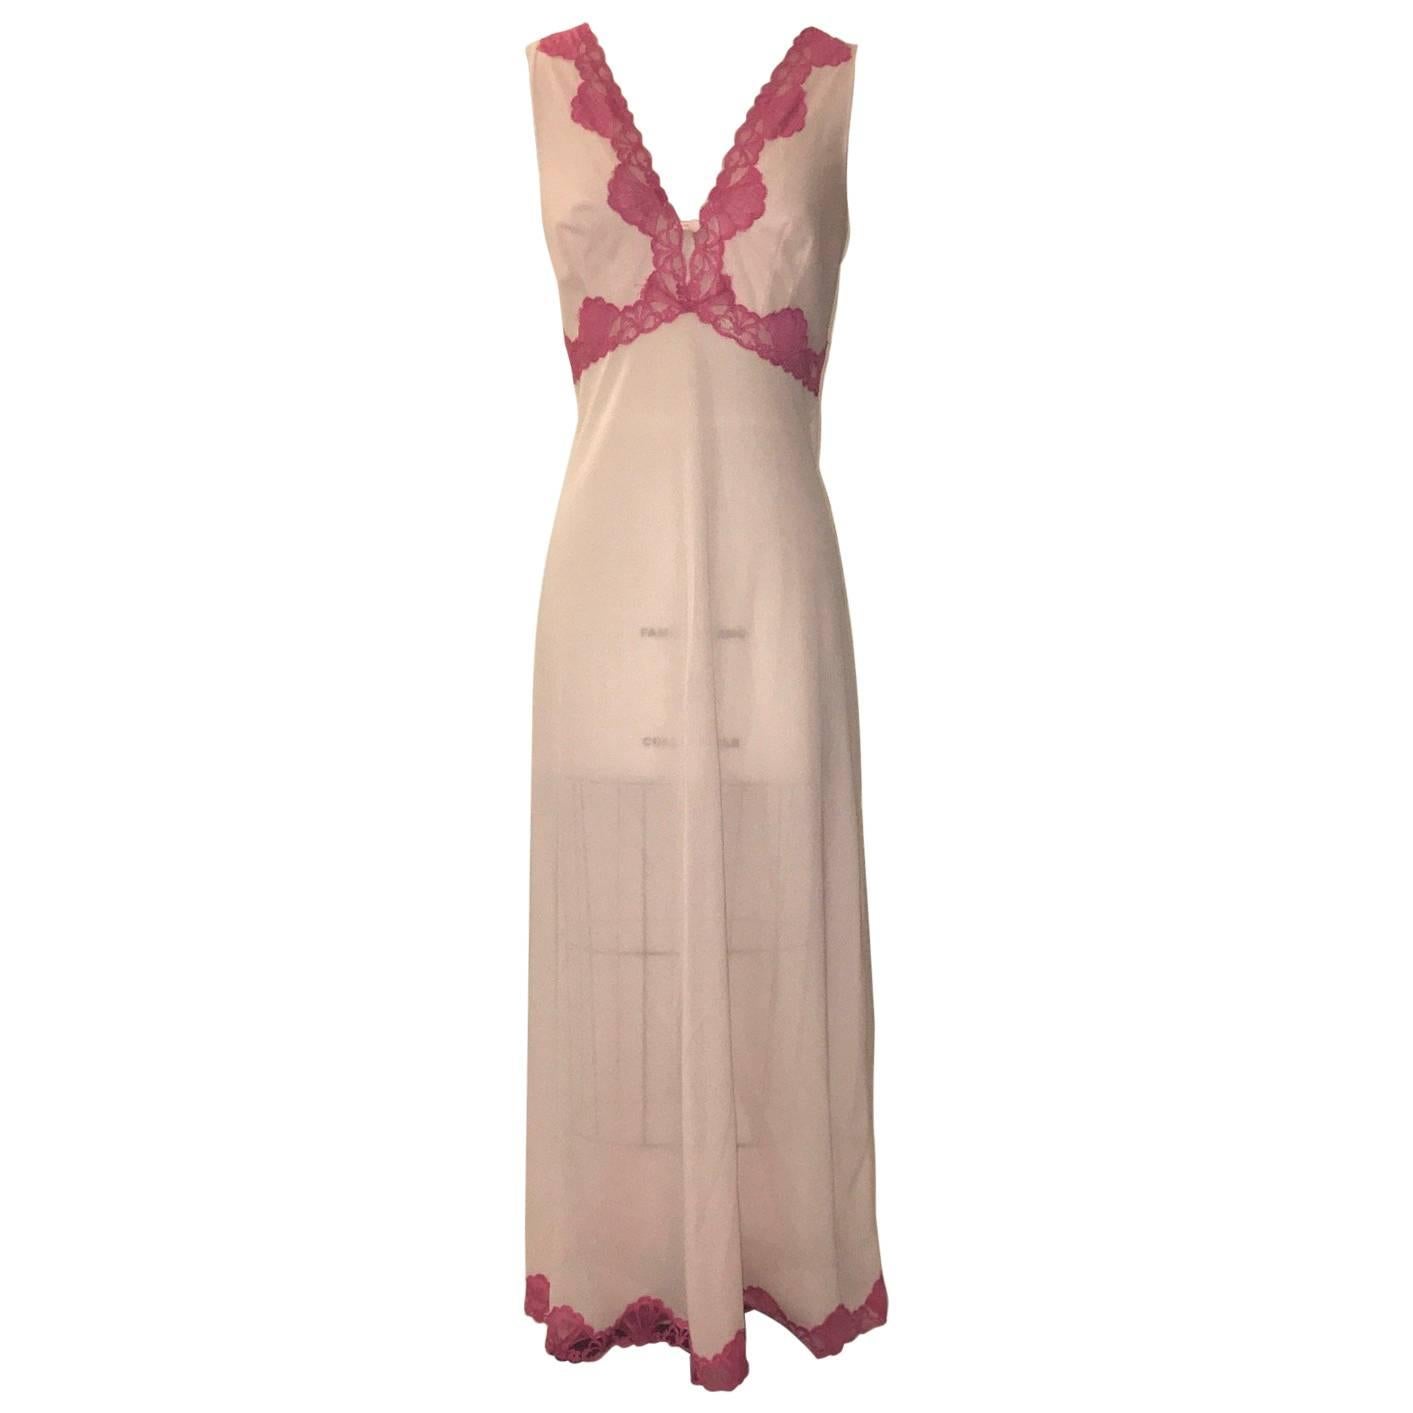 Emilio Pucci Pink Lace Trim Maxi Long Negligee Night Gown Slip, 1960s  